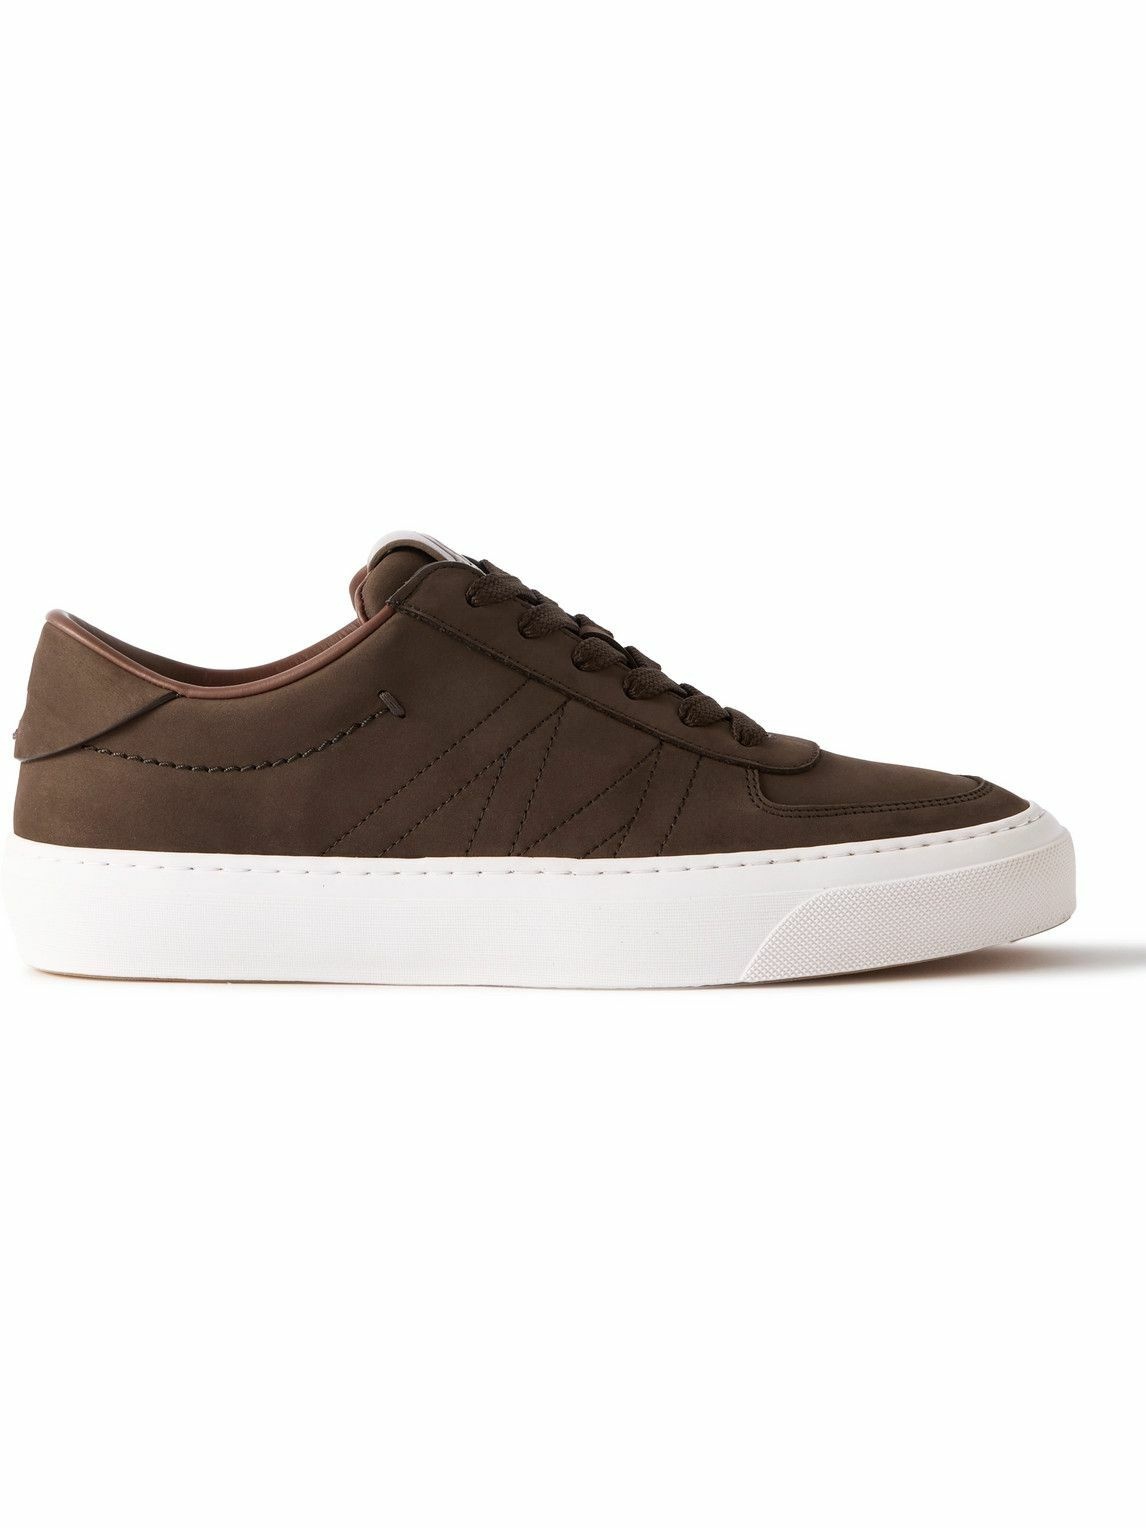 Photo: Moncler - Monclub Embroidered Suede Sneakers - Brown